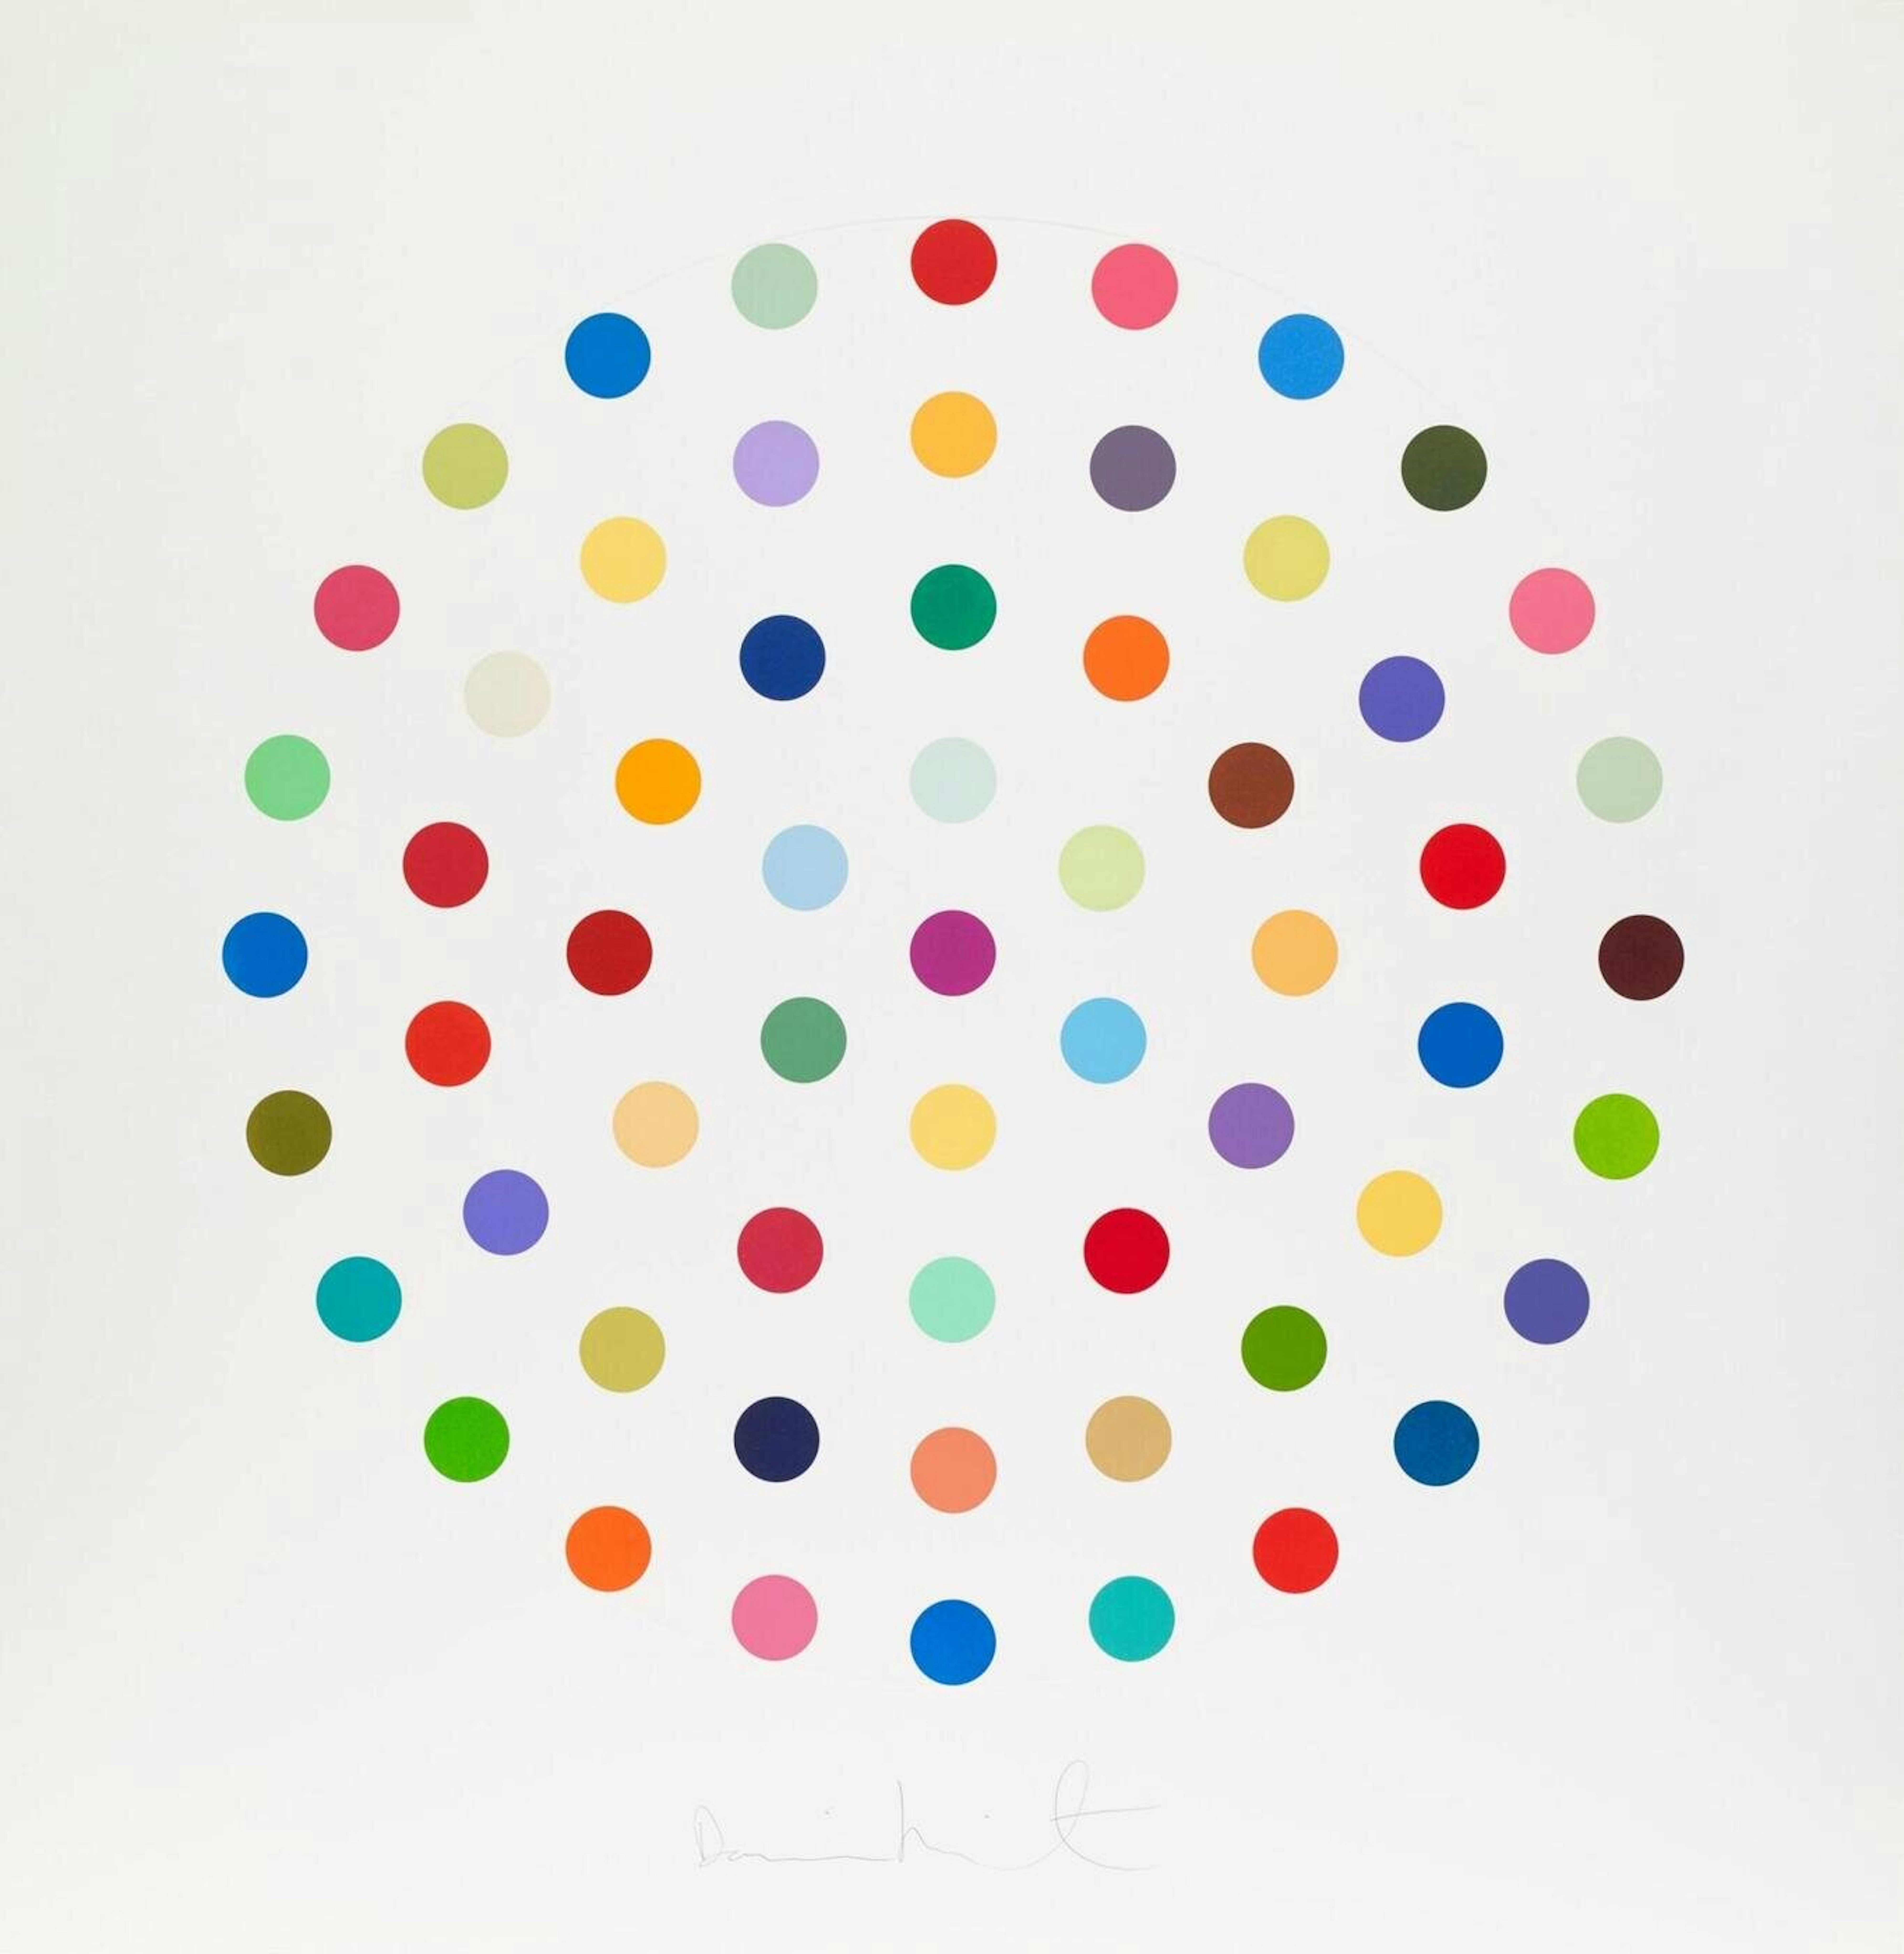 Etching by Damien Hirst depicting bright coloured dots forming a circular composition